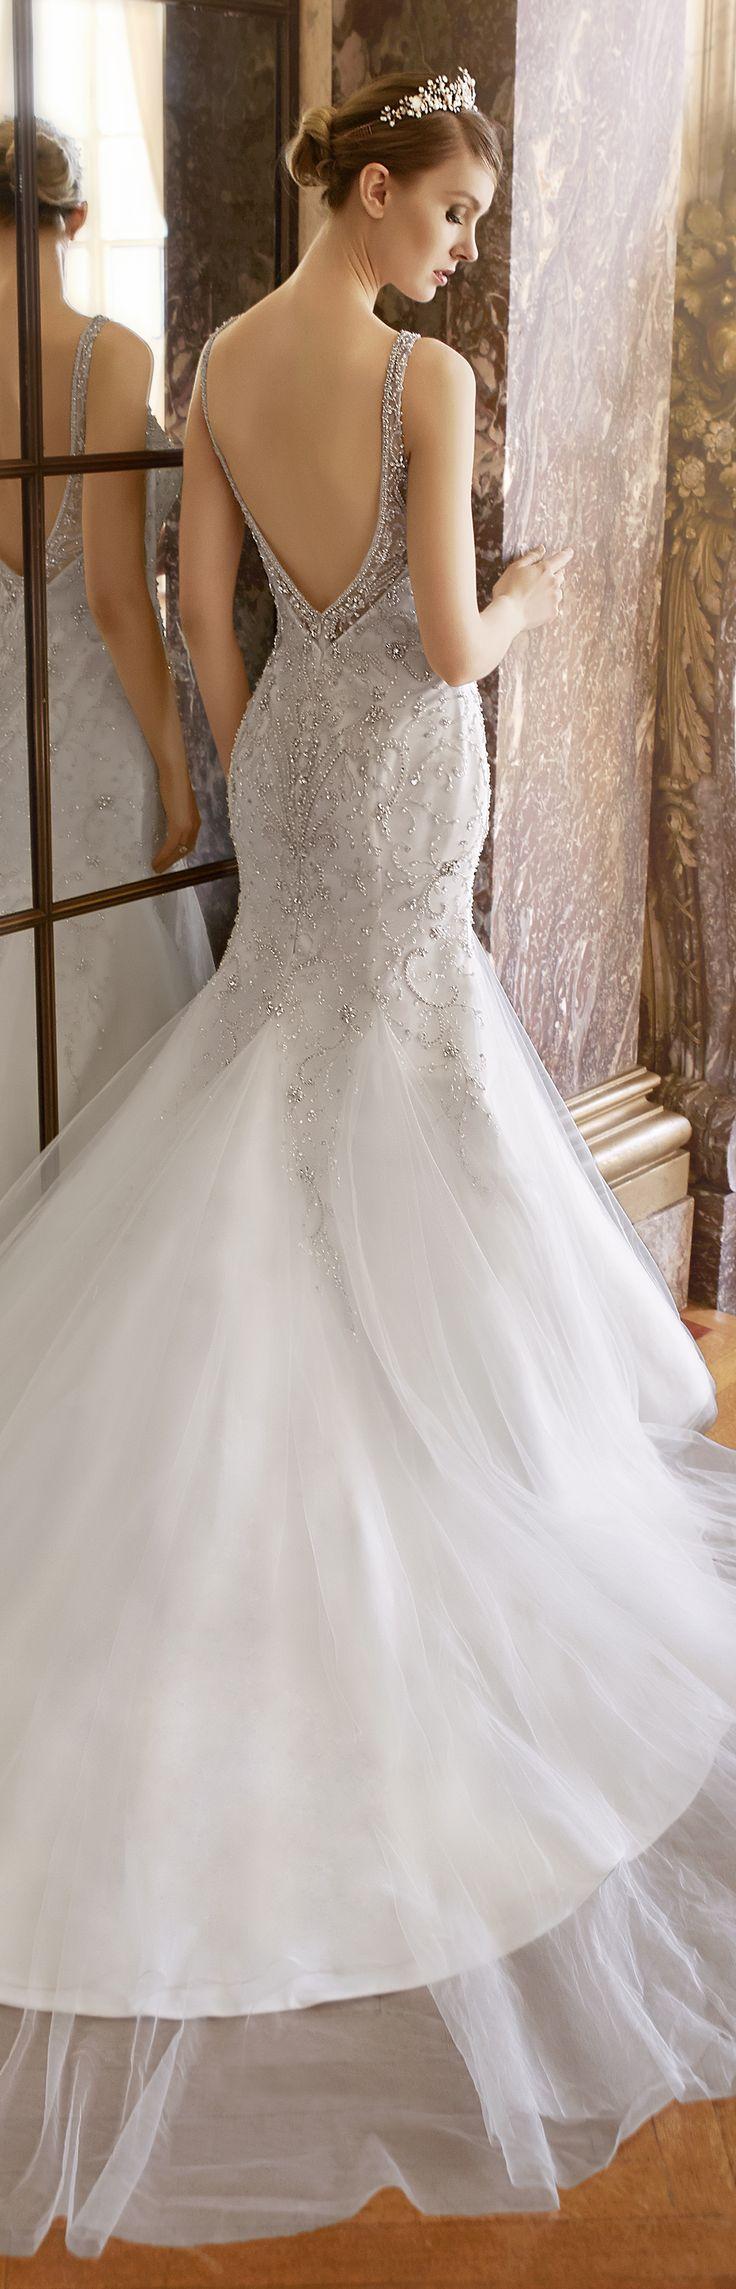 Wedding - V-neck And Low Illusion Back Beaded Wedding Gown 